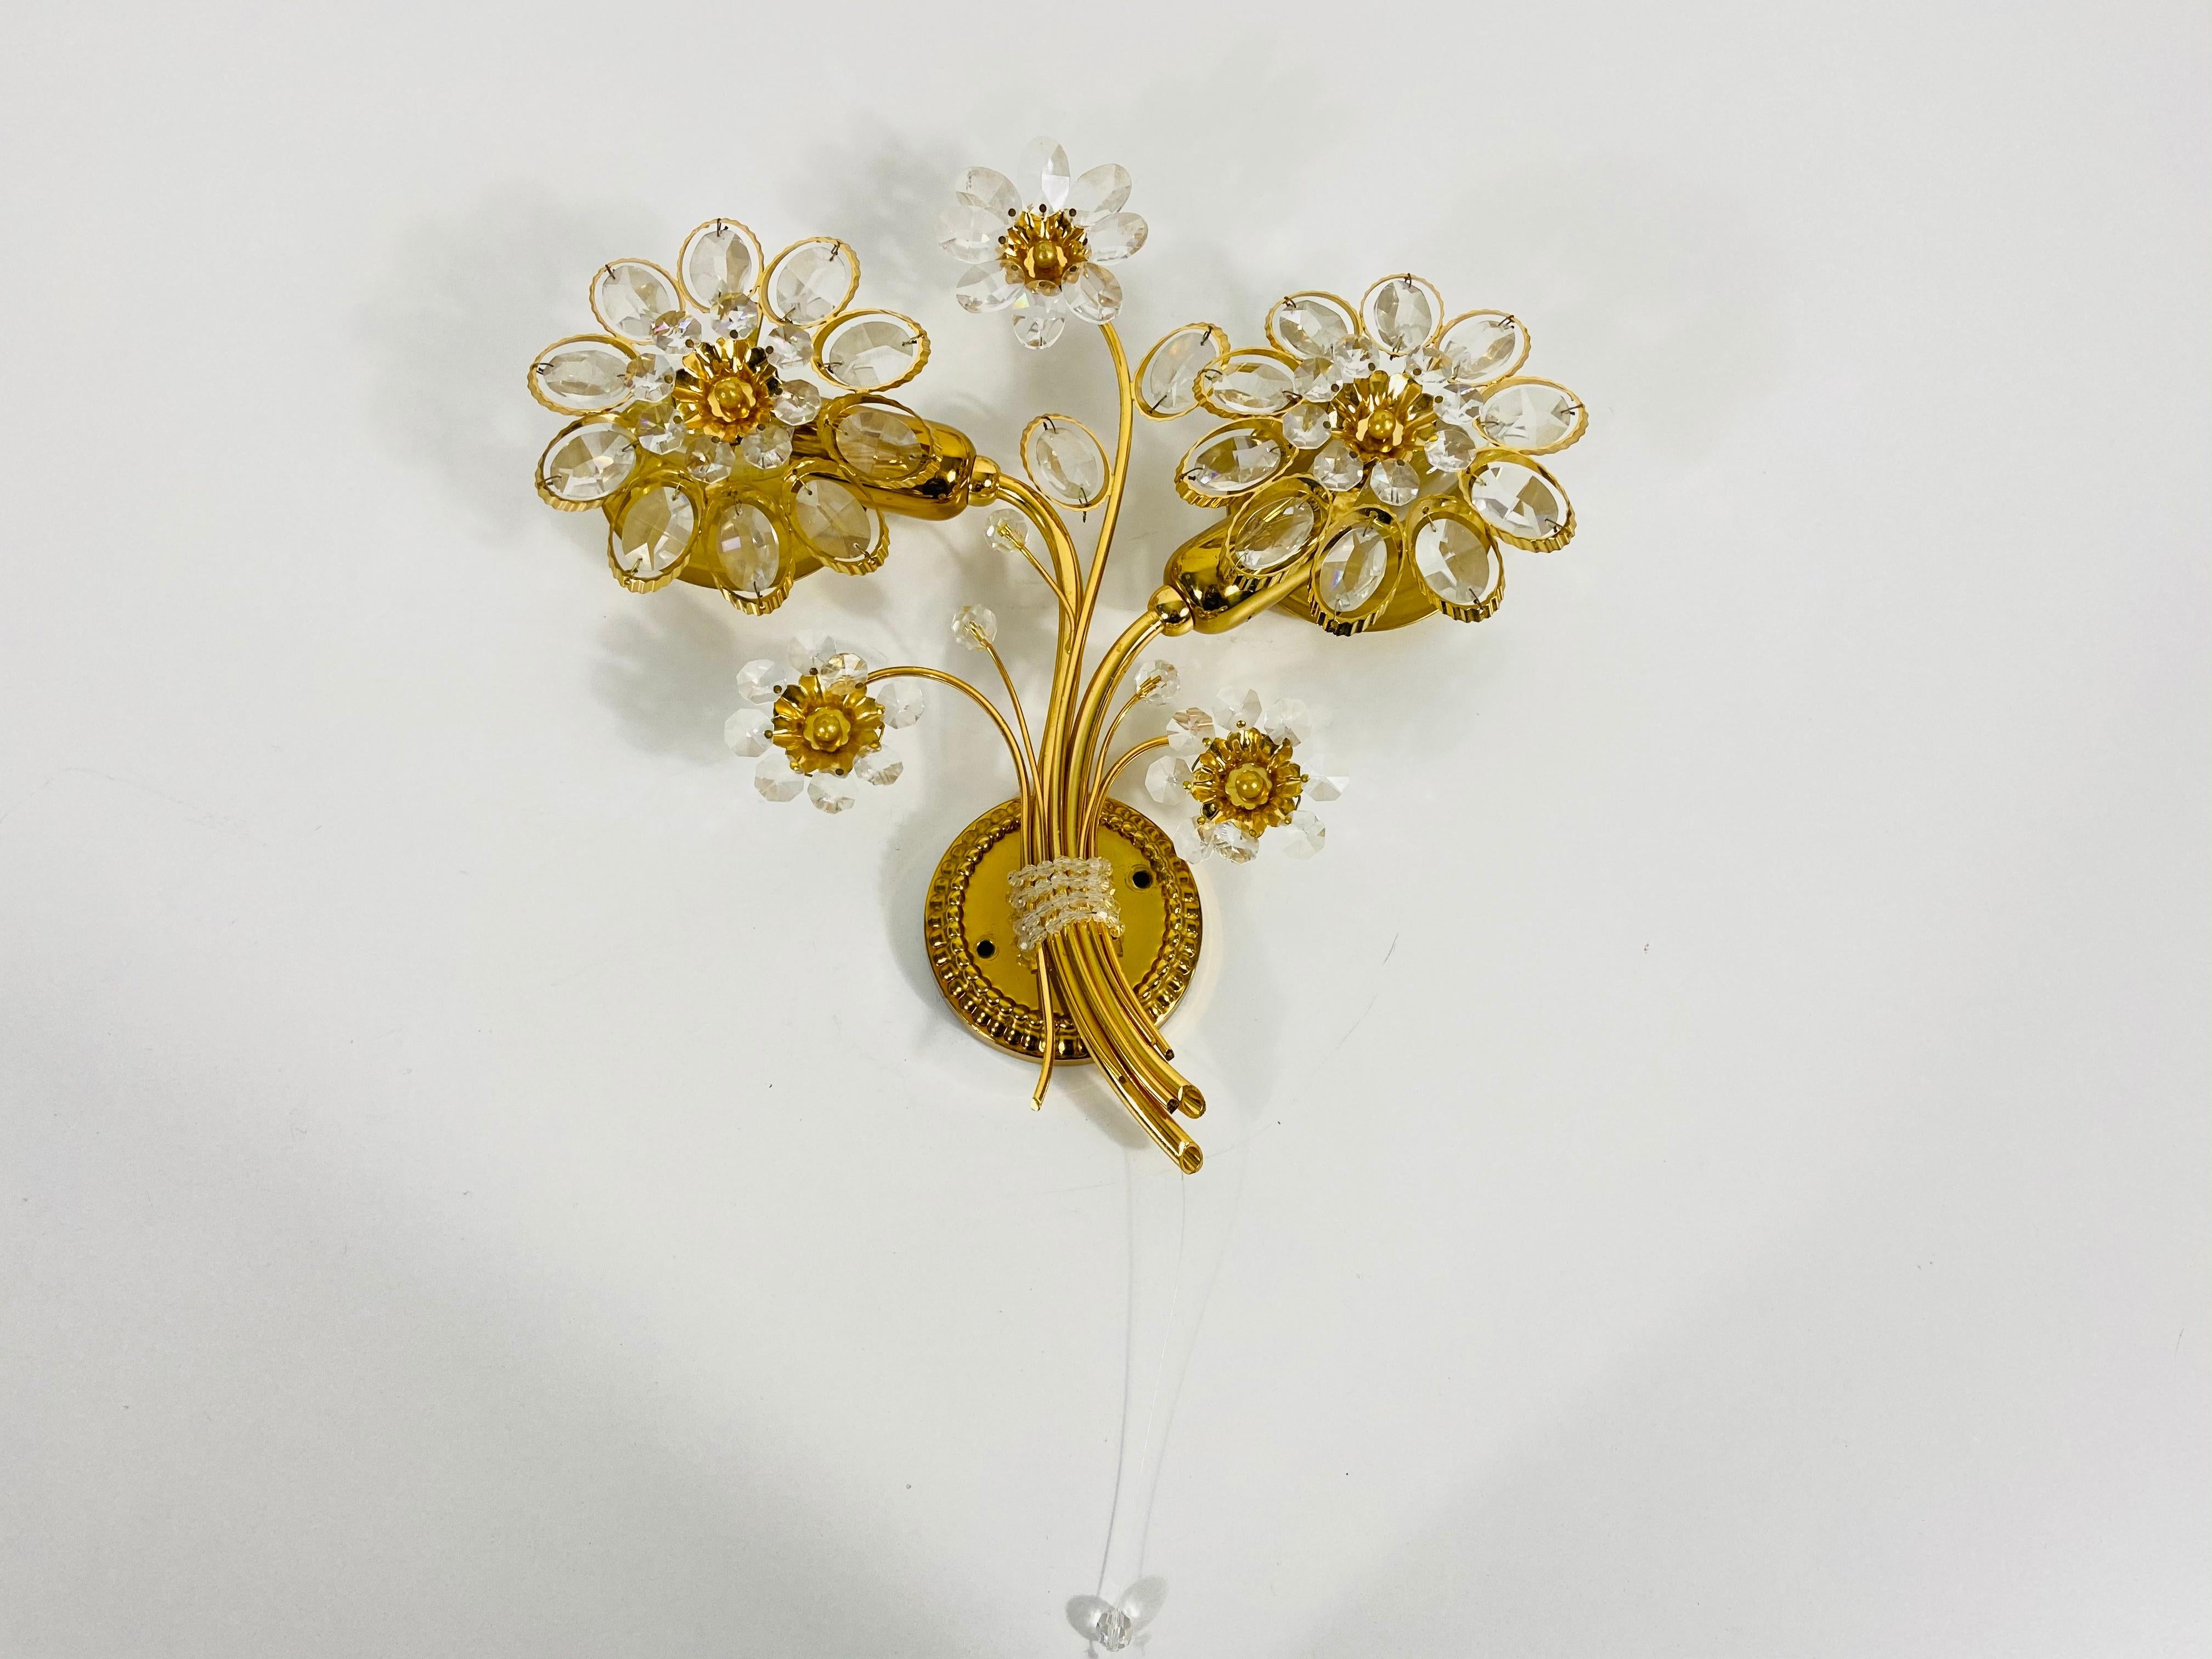 Extraordinary Floral Crystal Glass Sconce by Palwa, Germany, 1960s For Sale 4